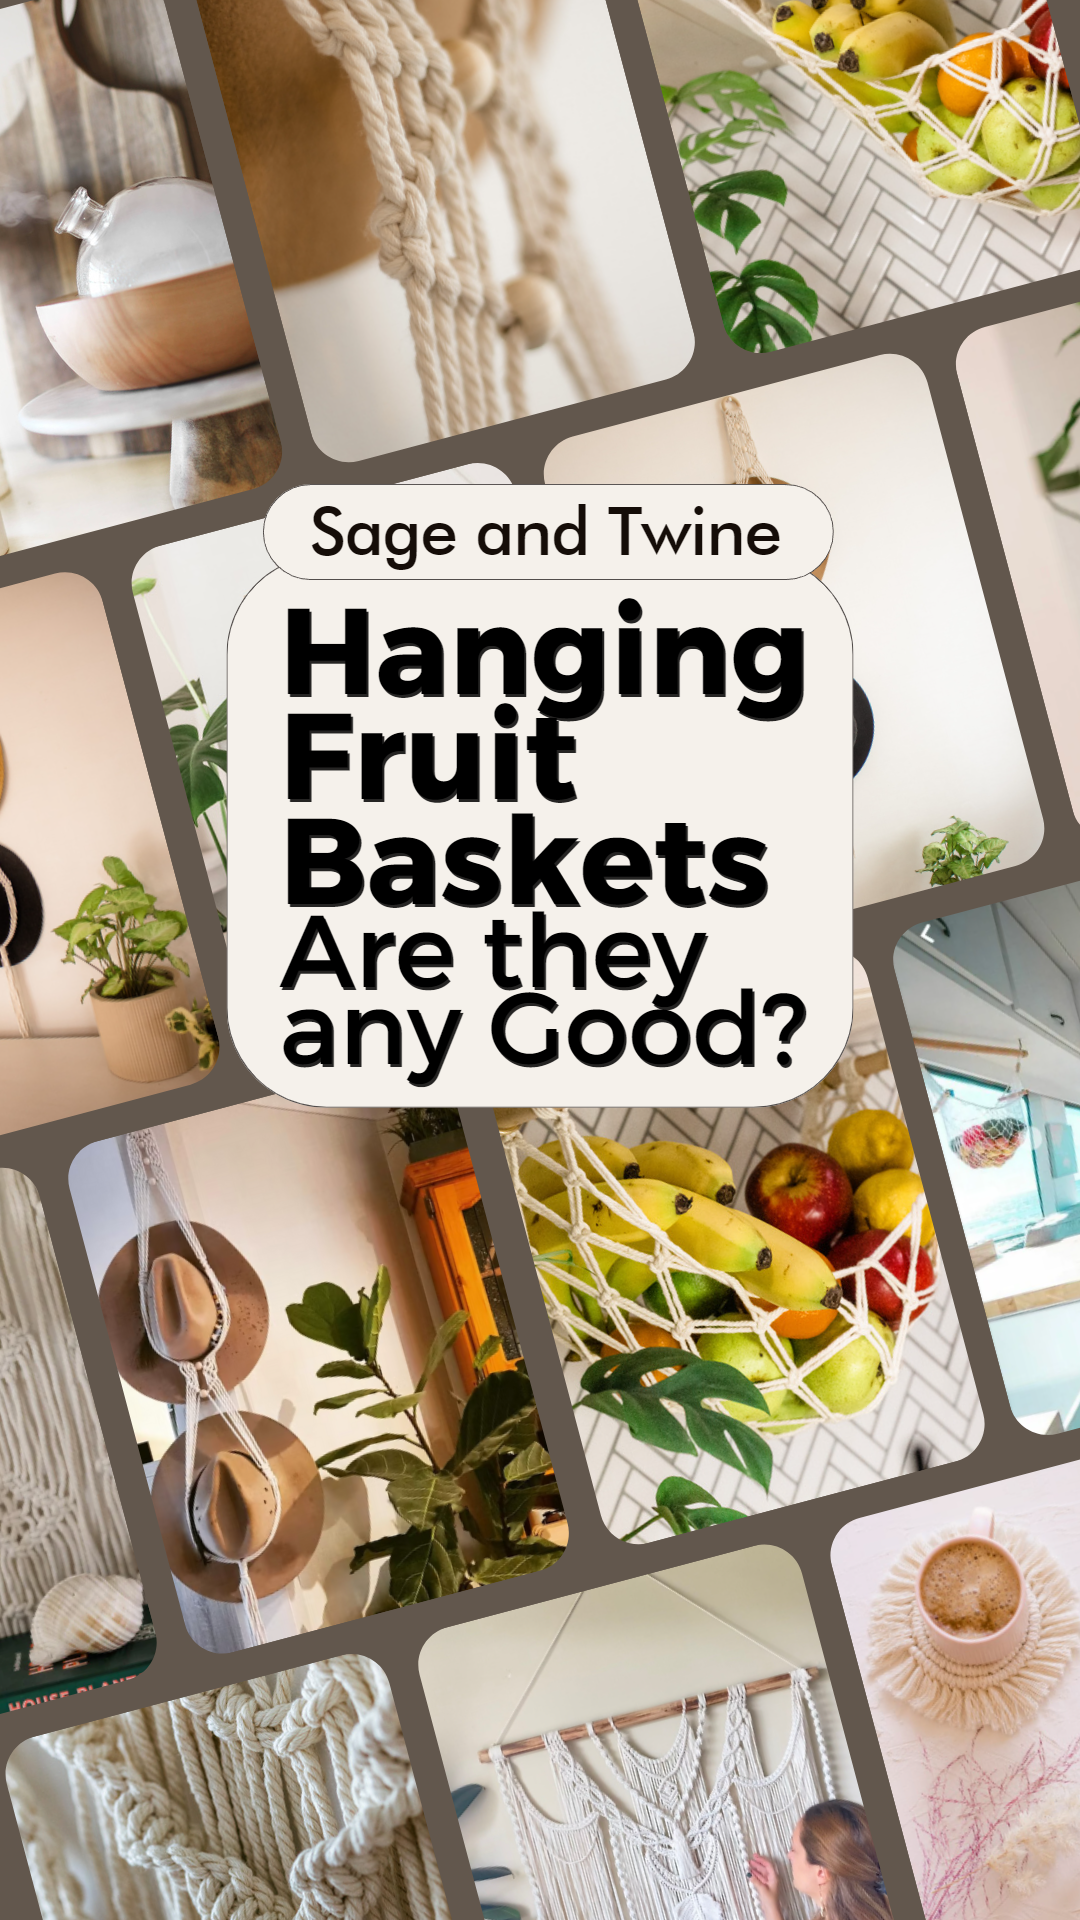 Are Hanging Fruit Baskets Good? Discover the Beauty of Macrame Products at Sage and Twine